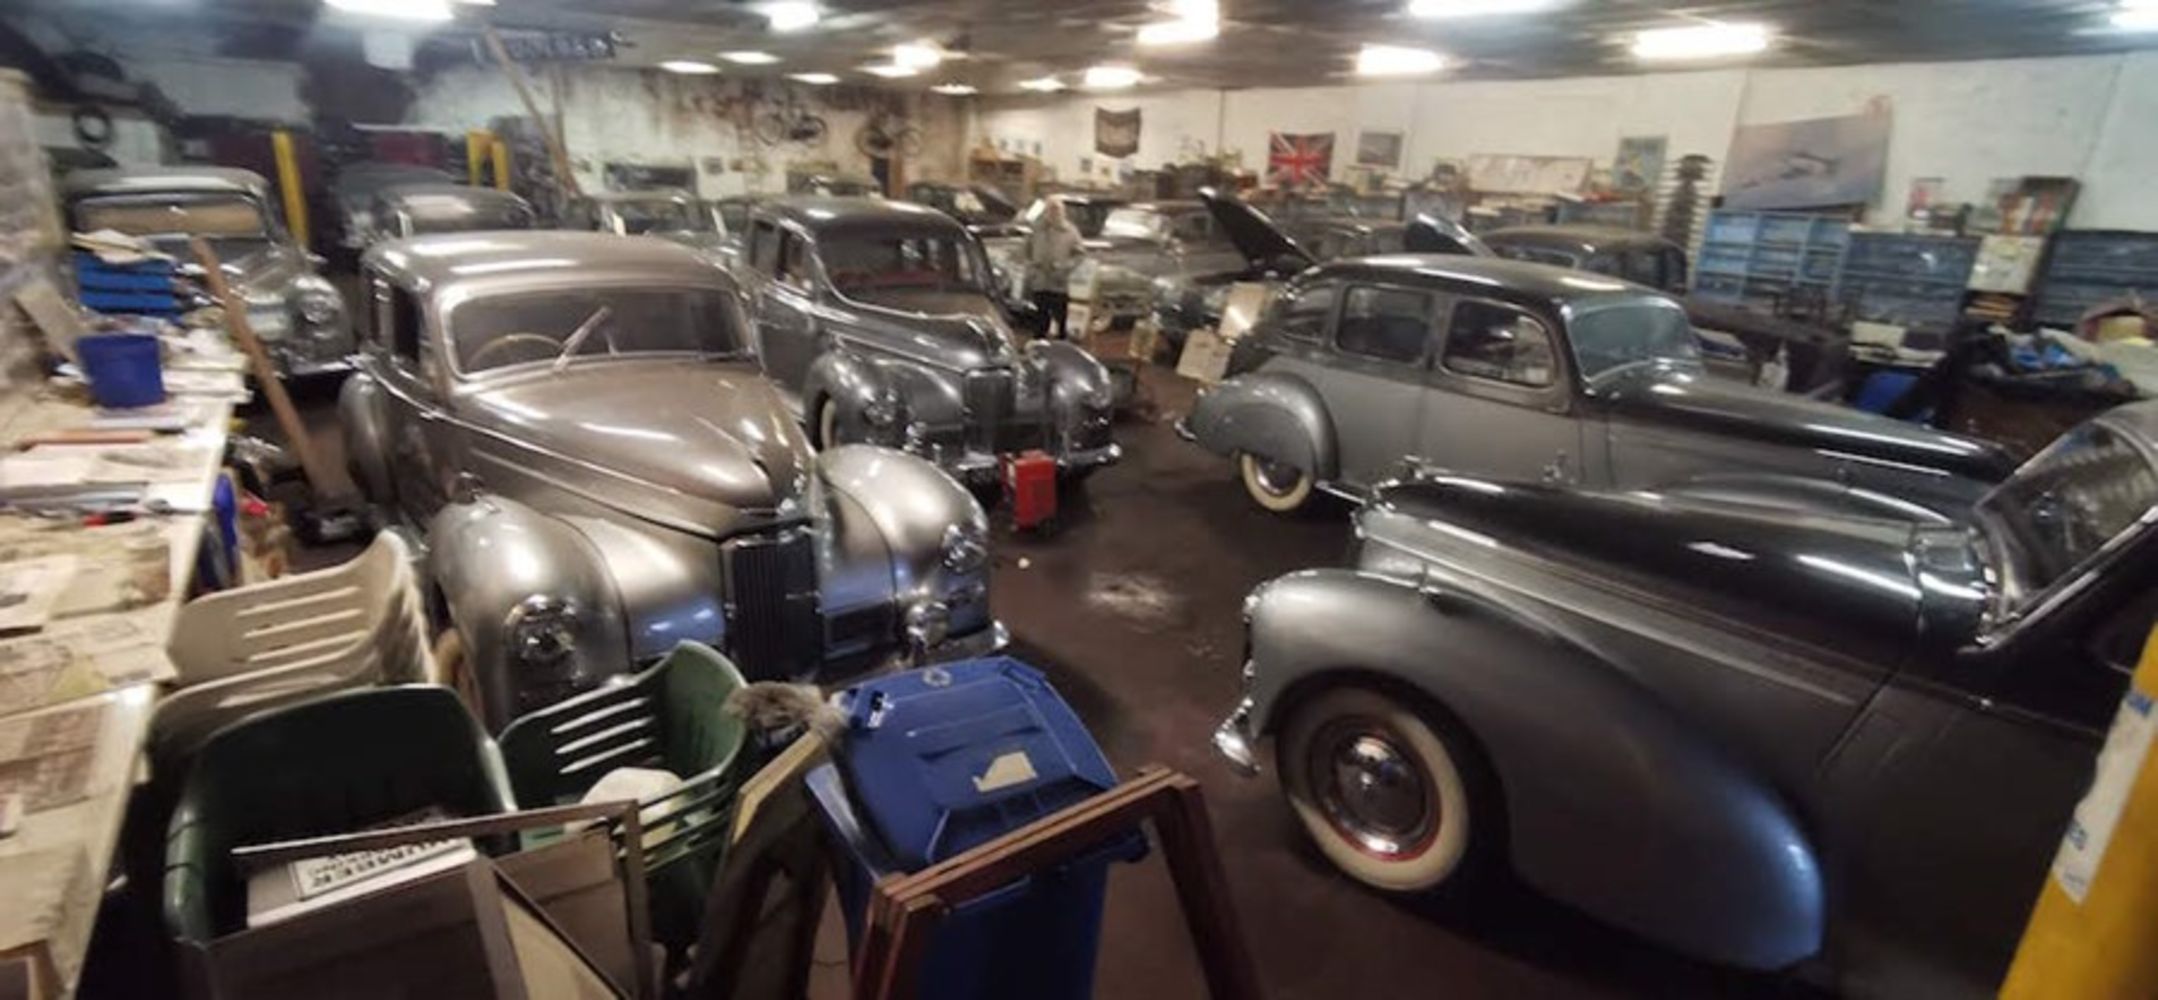 Classic Car Auction - The Humber Museum Collection -NOTE REVISED DATE. THIS IS NOW A CLOSED SALE ONLINE ONLY WITH NO PUBLIC BIDDING.